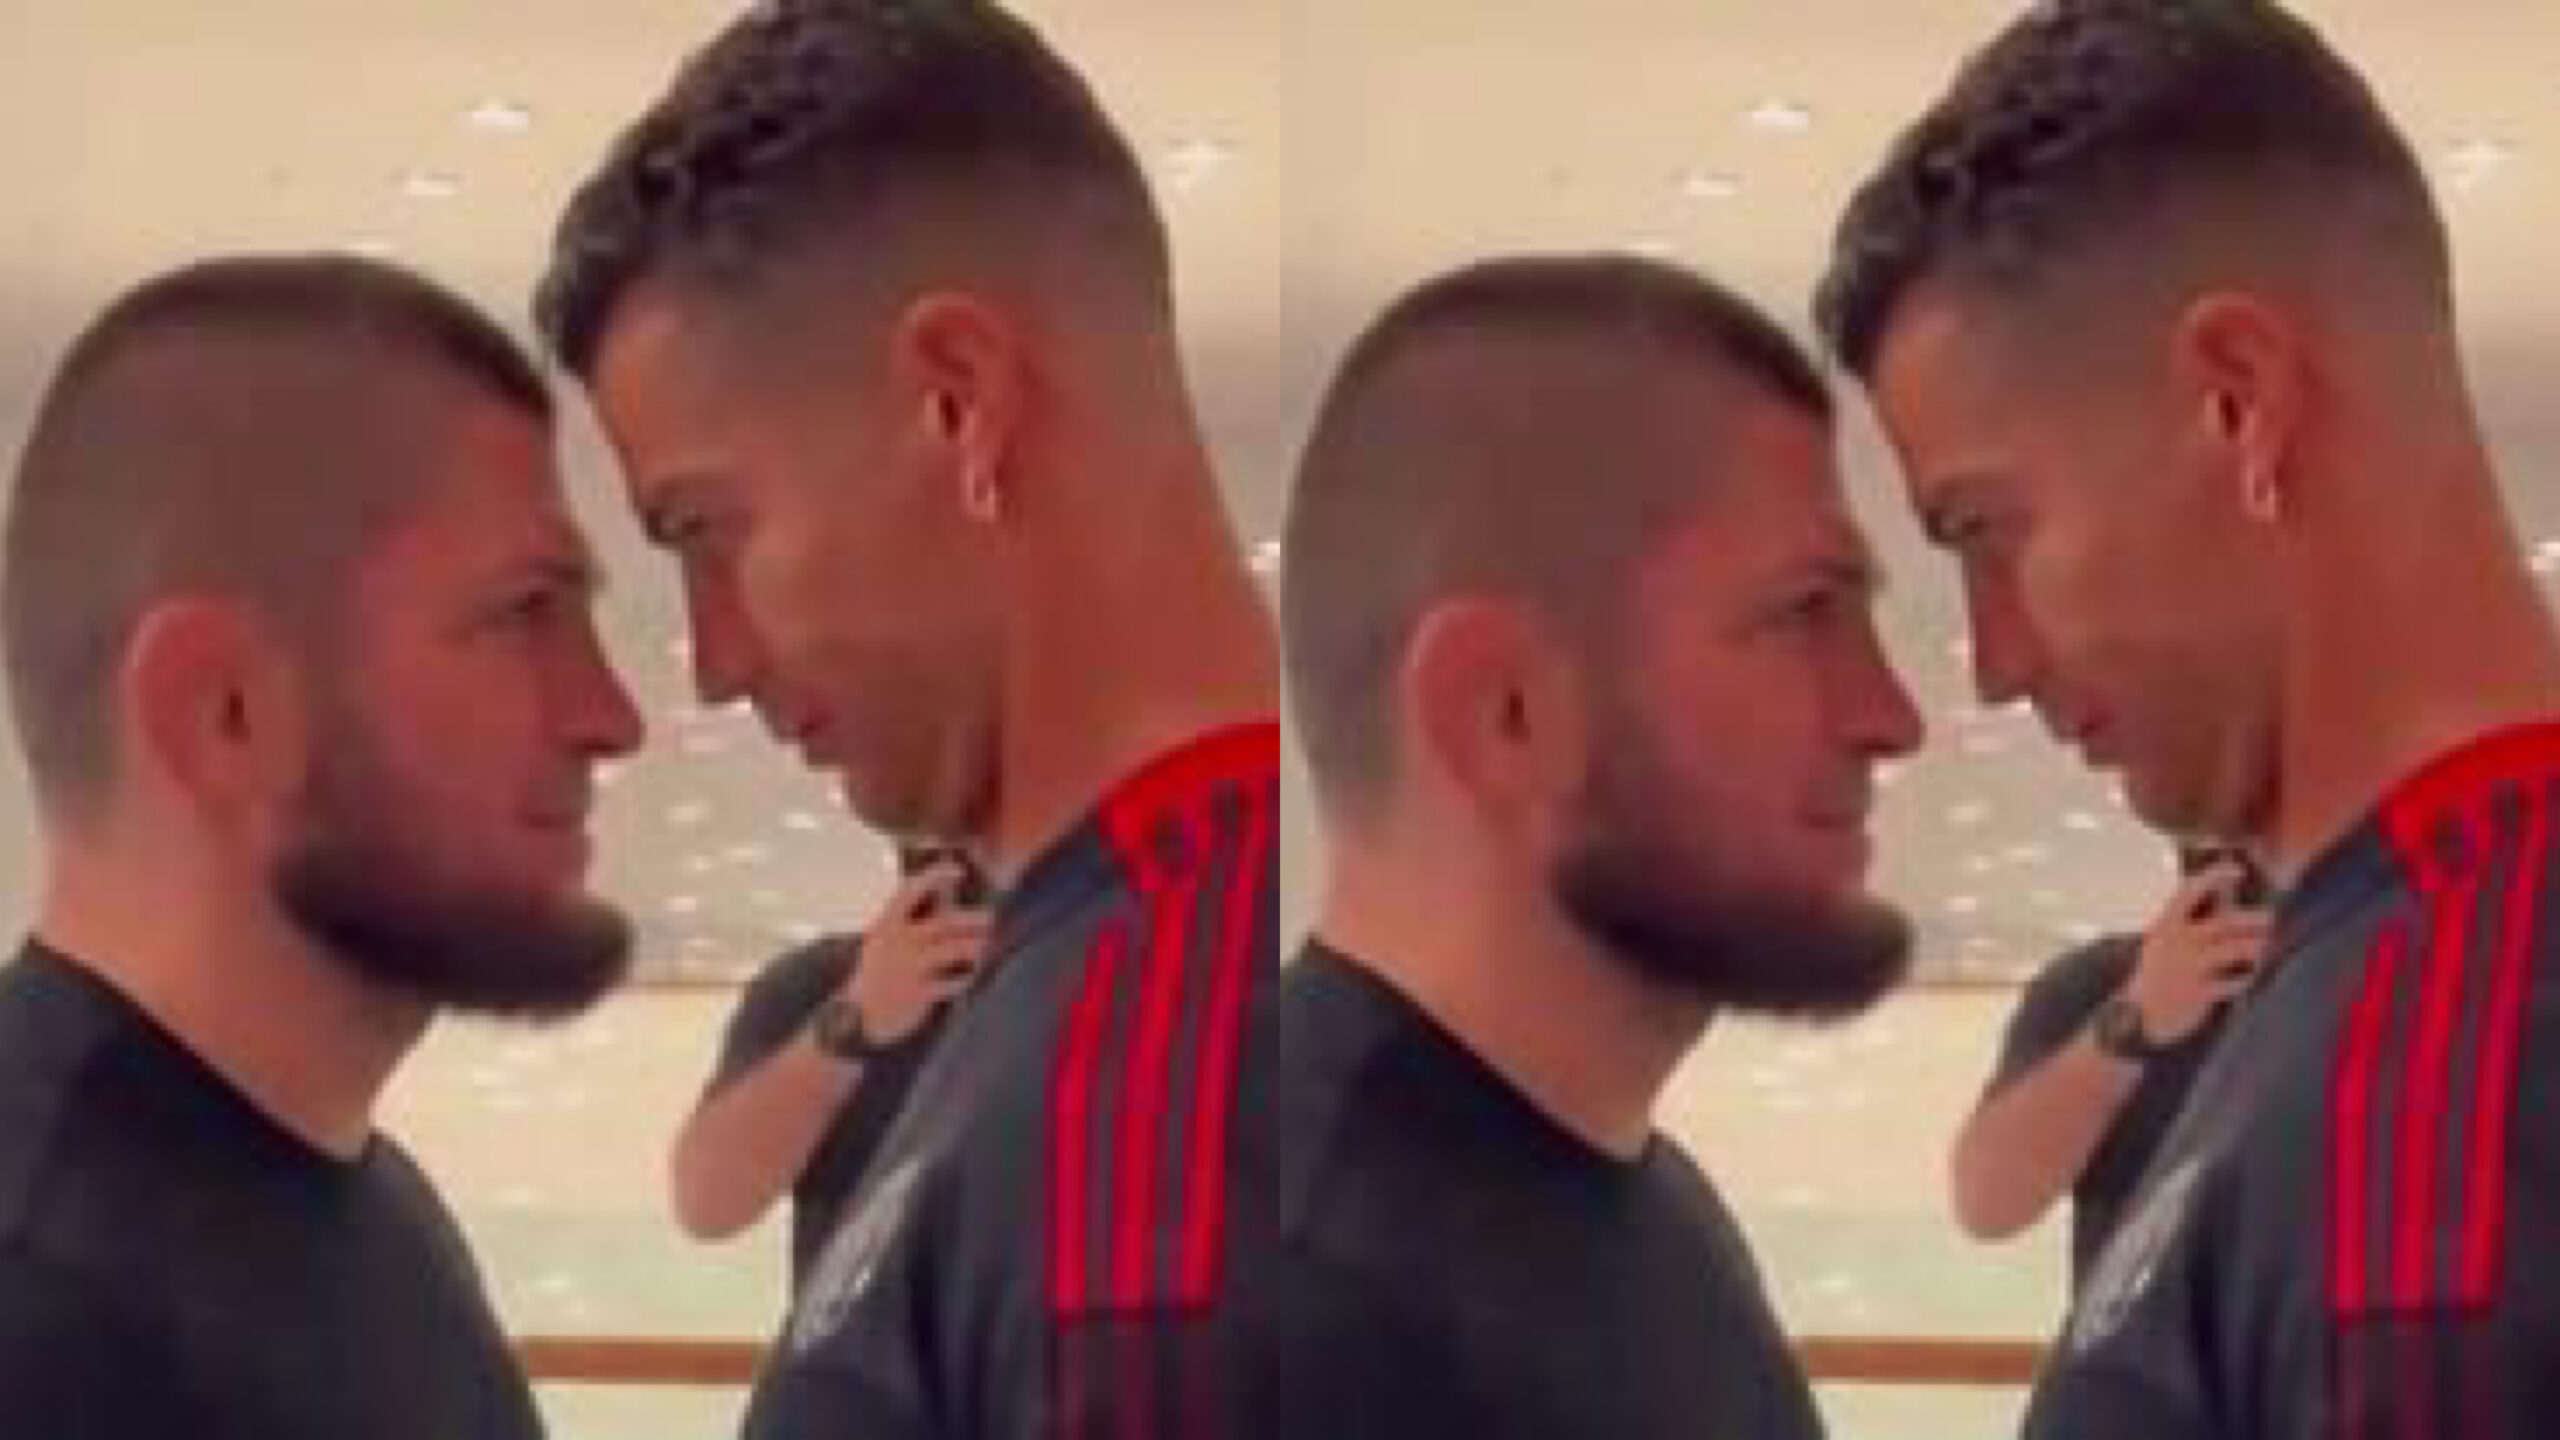 Viral video of Cristiano Ronaldo facing-off with UFC fighter Khabib warms hearts on social media